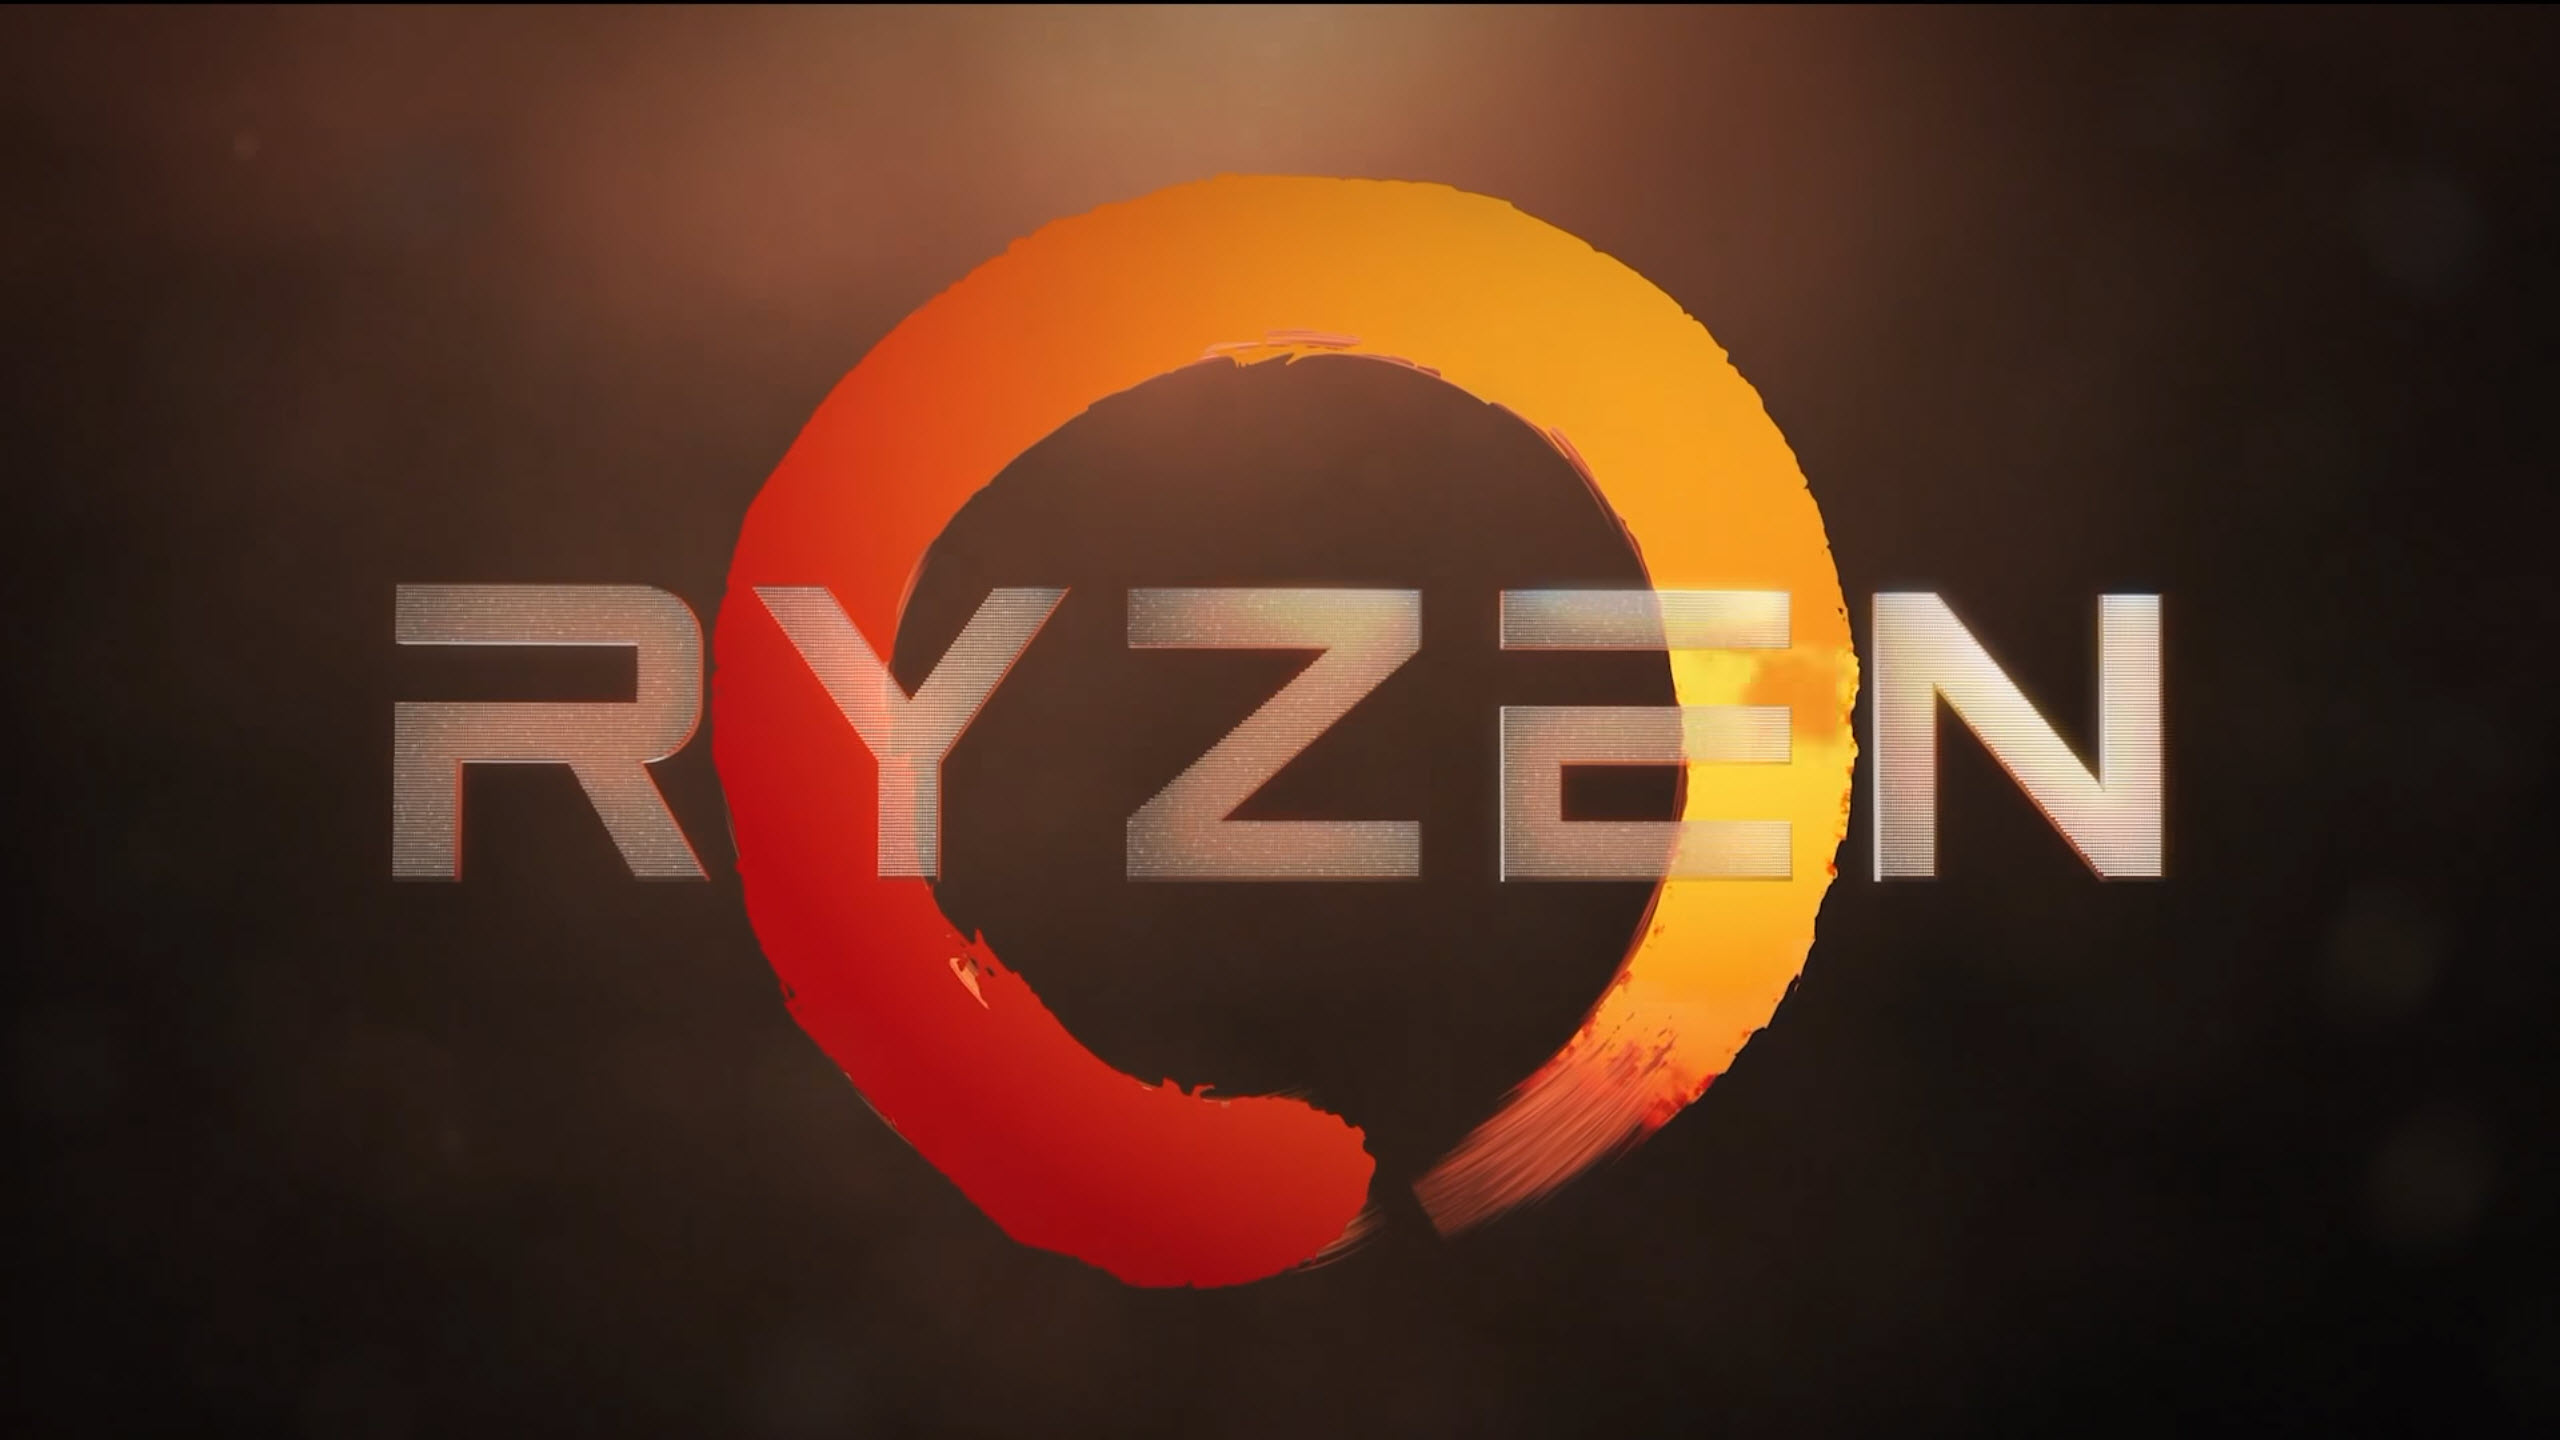 It’s Official: AMD Ryzen Does Not Officially Support Windows 7